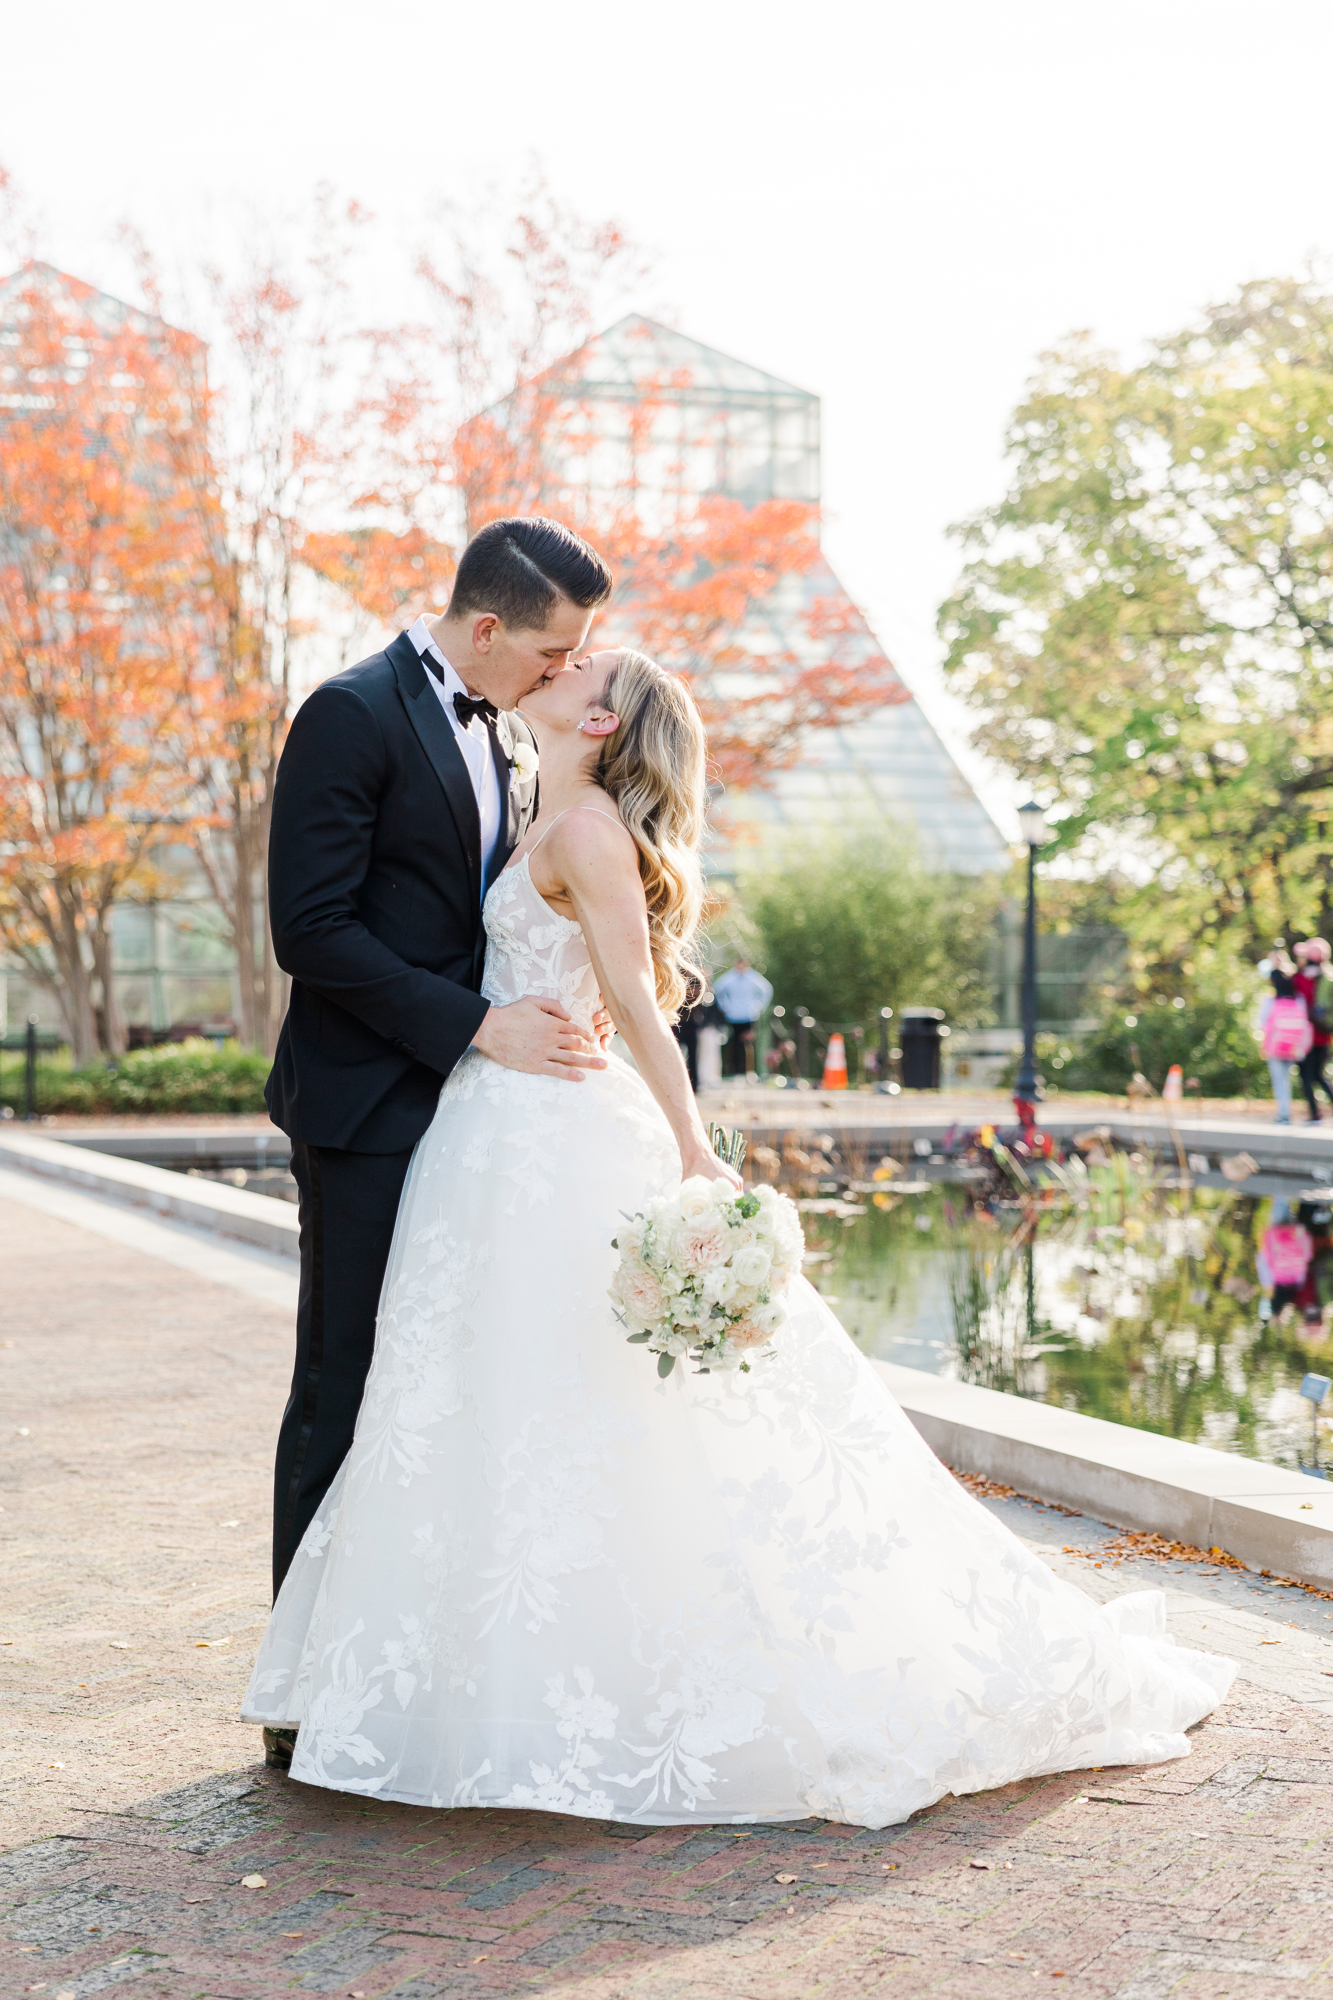 Awesome Outdoor NYC Wedding Venues